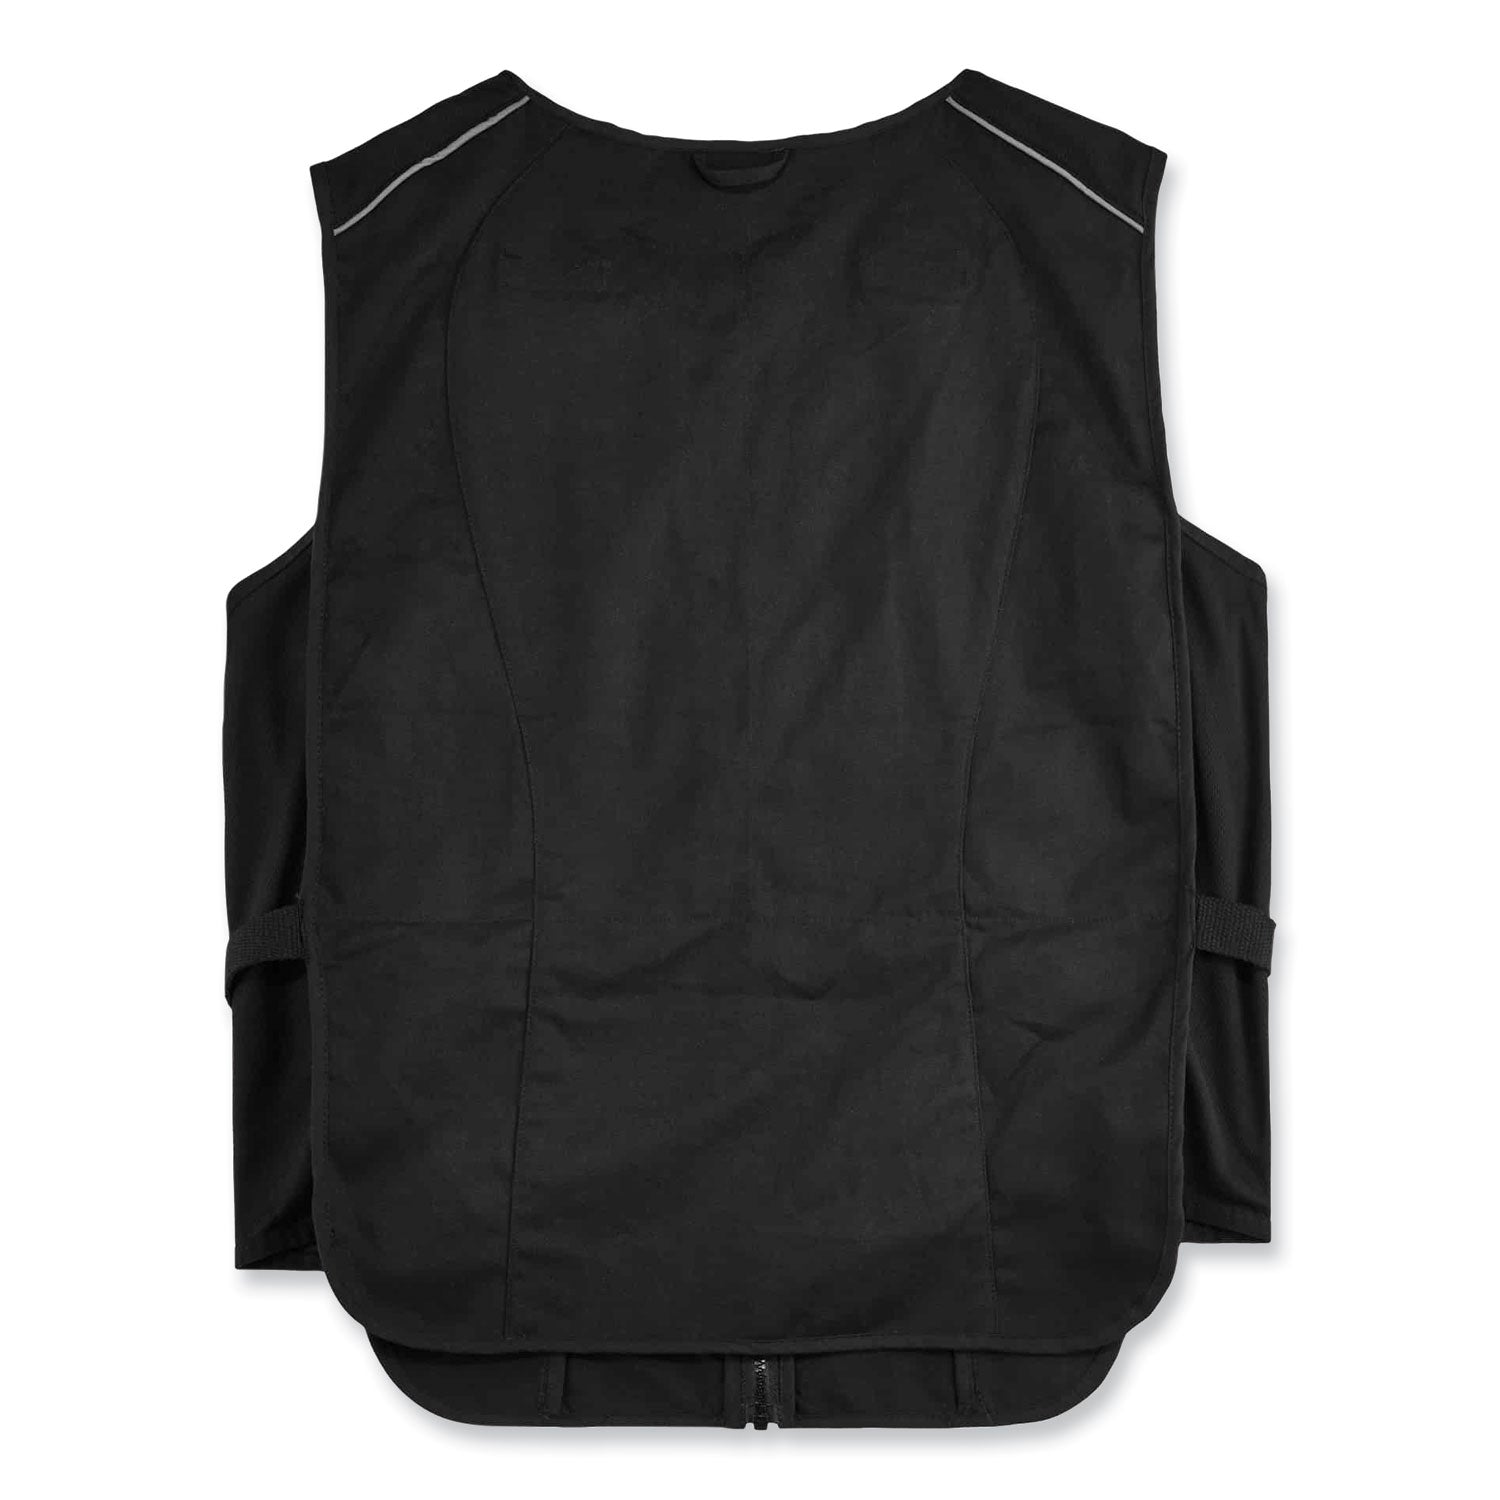 chill-its-6255-lightweight-phase-change-cooling-vest-cotton-polyester-small-medium-black-ships-in-1-3-business-days_ego12123 - 3